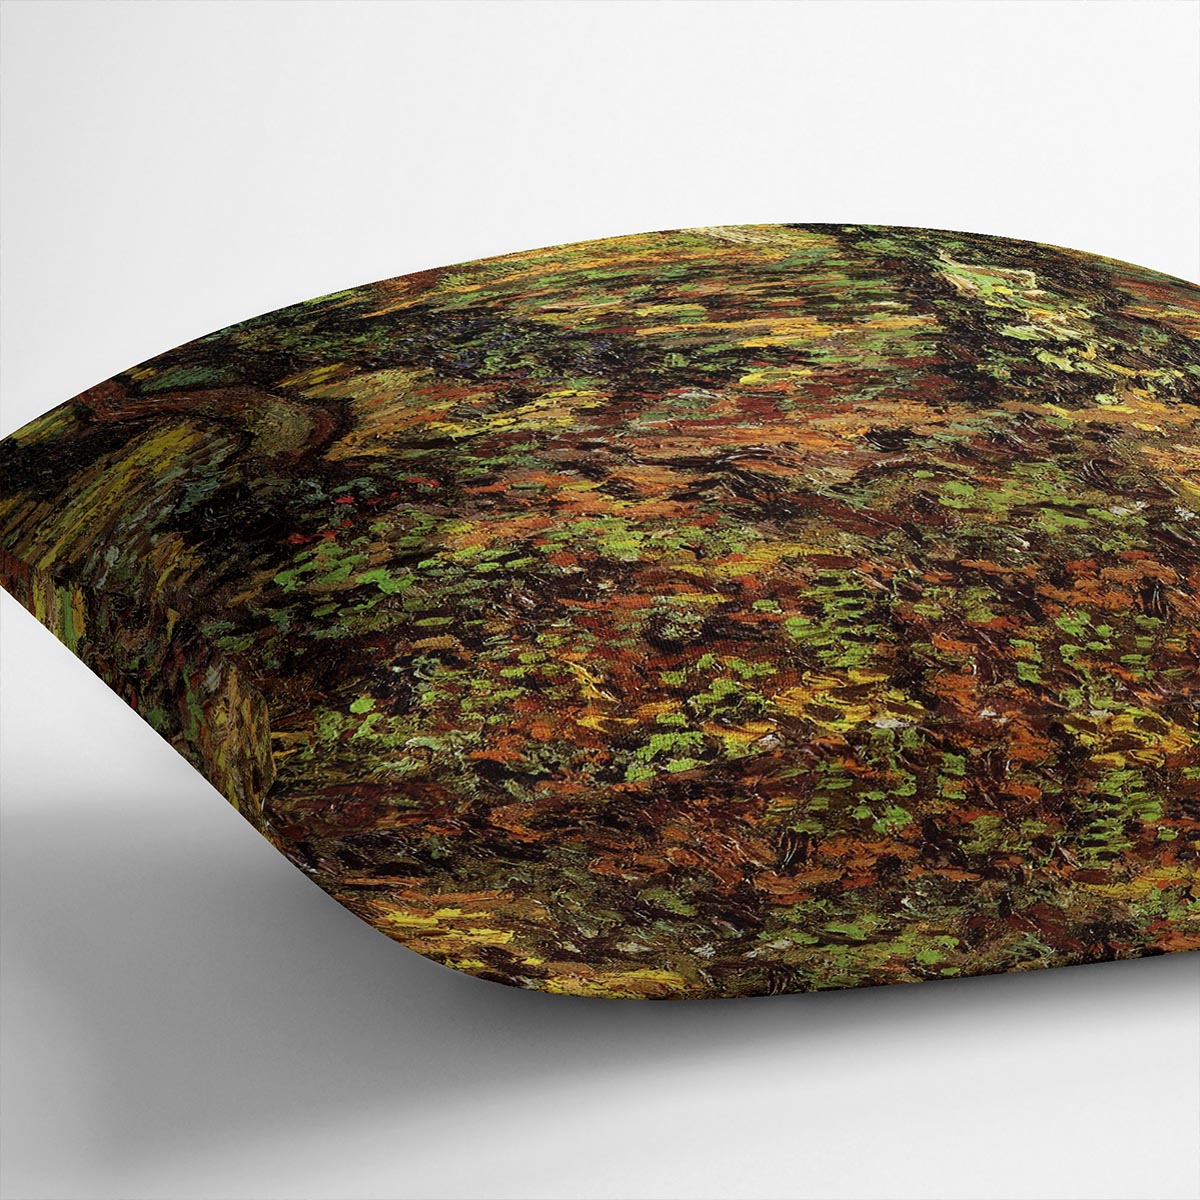 Tree Trunks with Ivy by Van Gogh Cushion